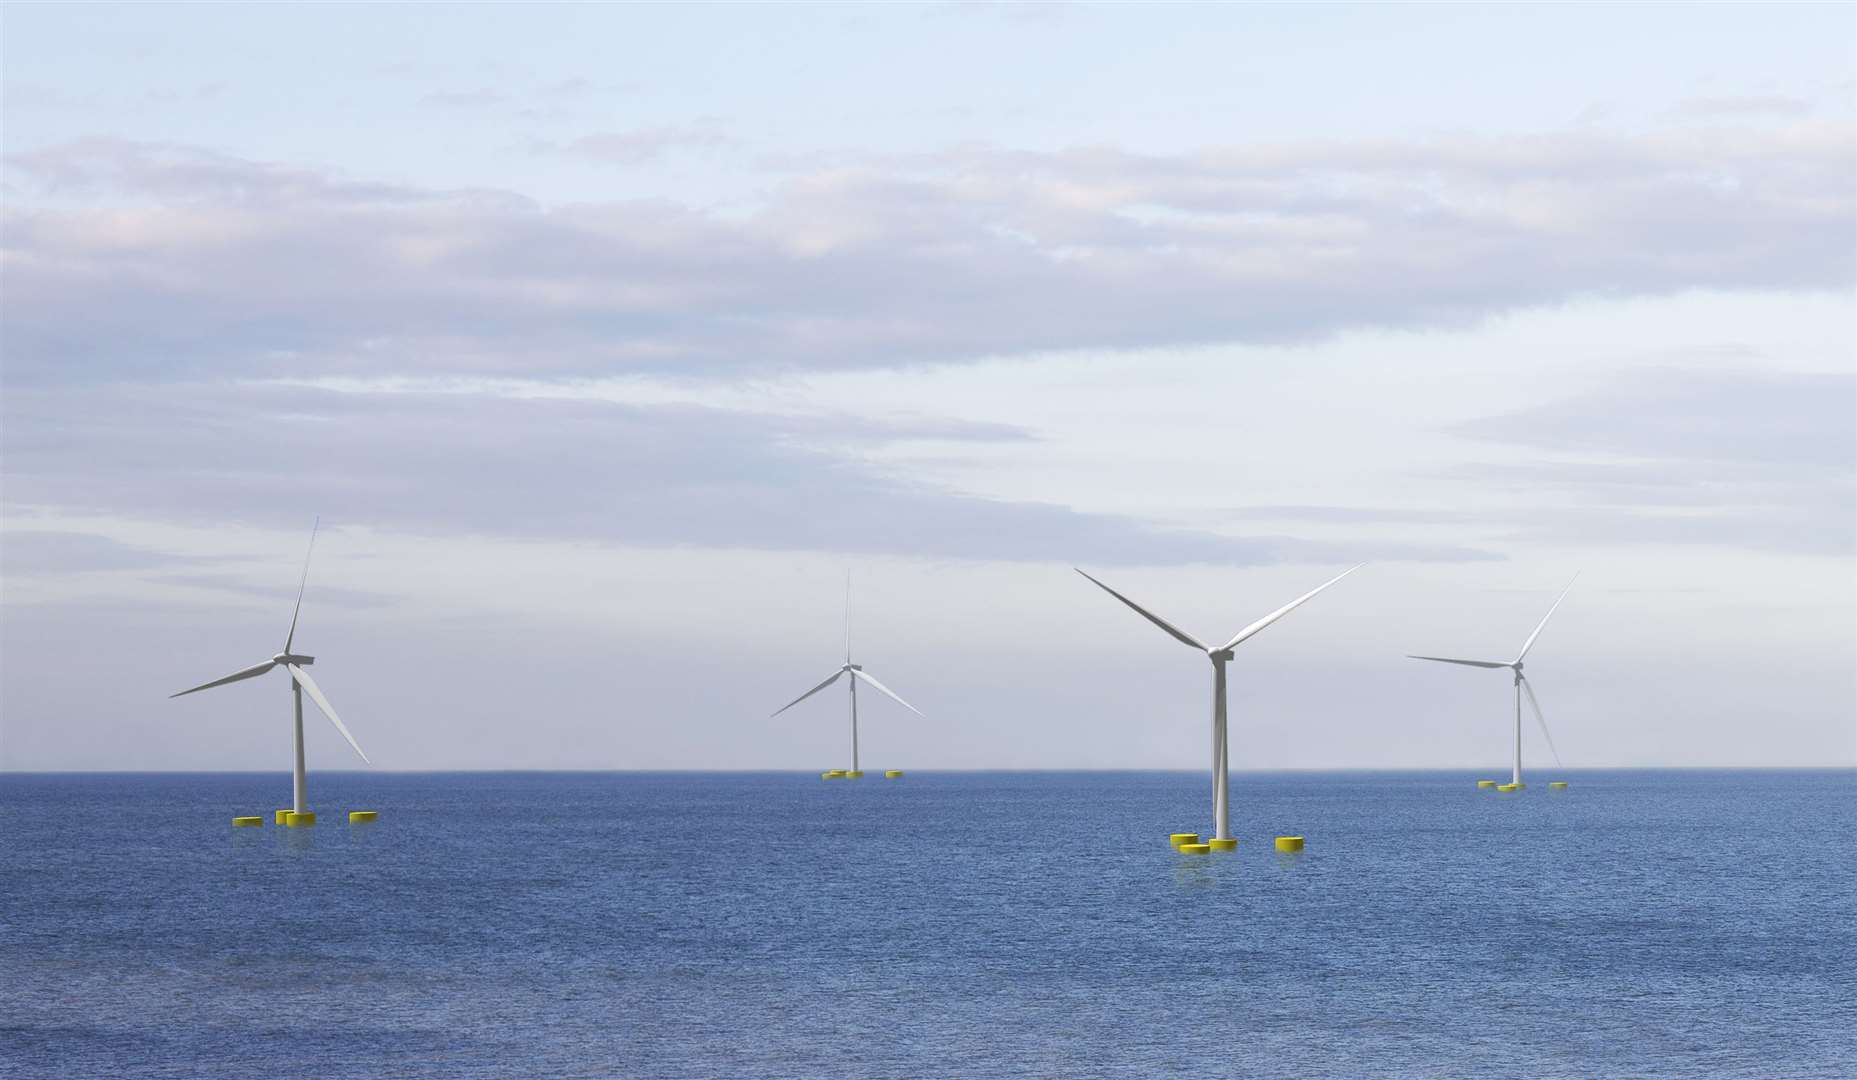 The proposed Pentland Floating Offshore Wind Farm will now have a maximum of seven turbines.